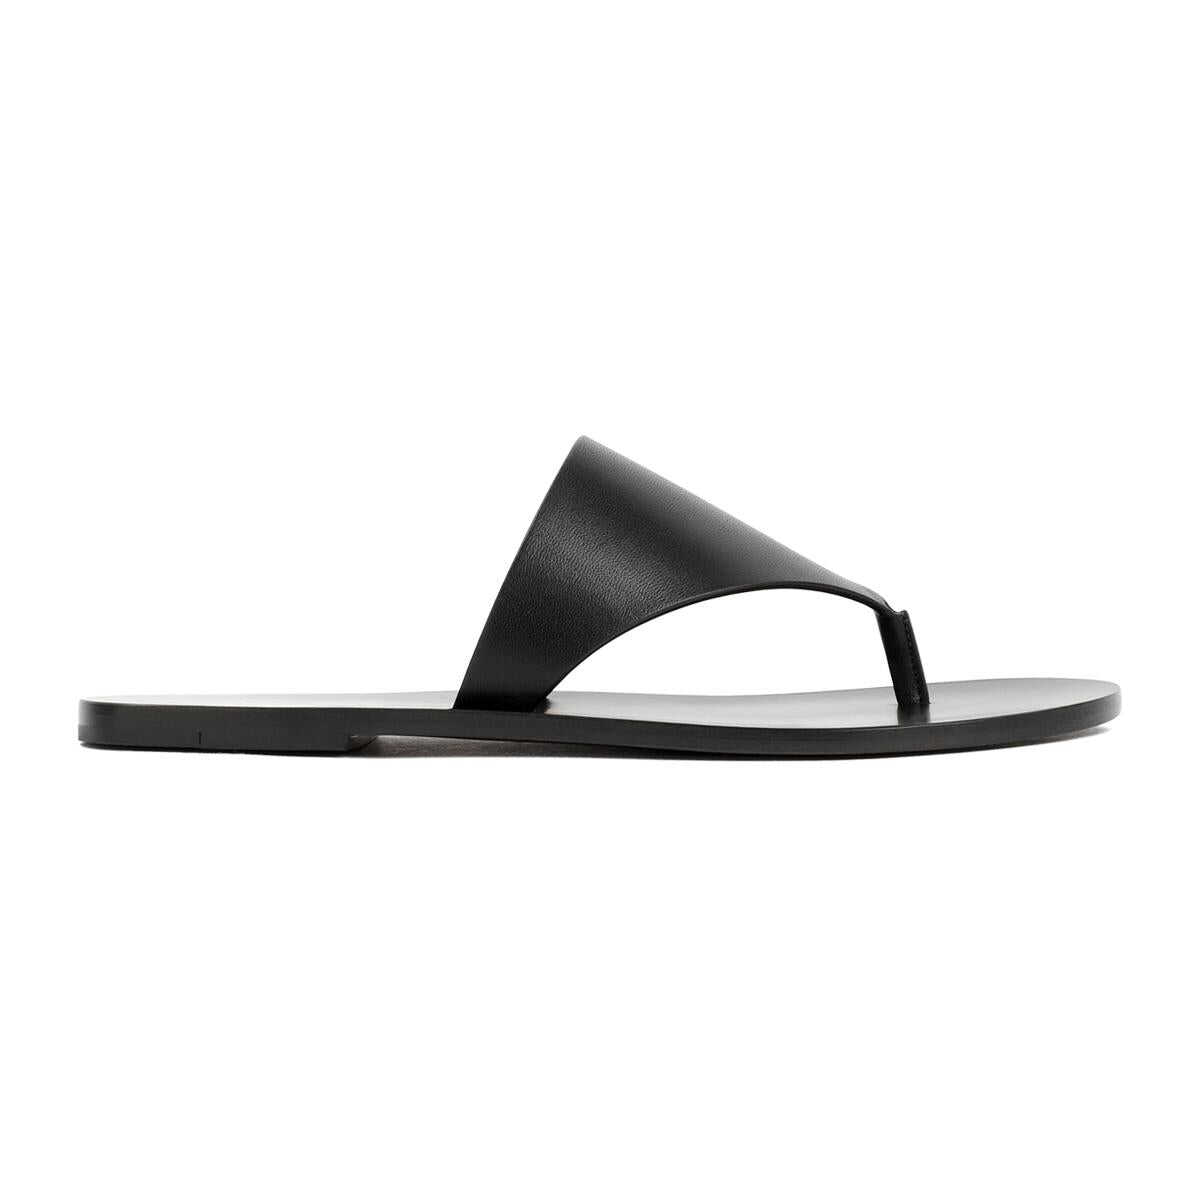 THE ROW THE ROW AVERY THONG SANDAL SHOES Black